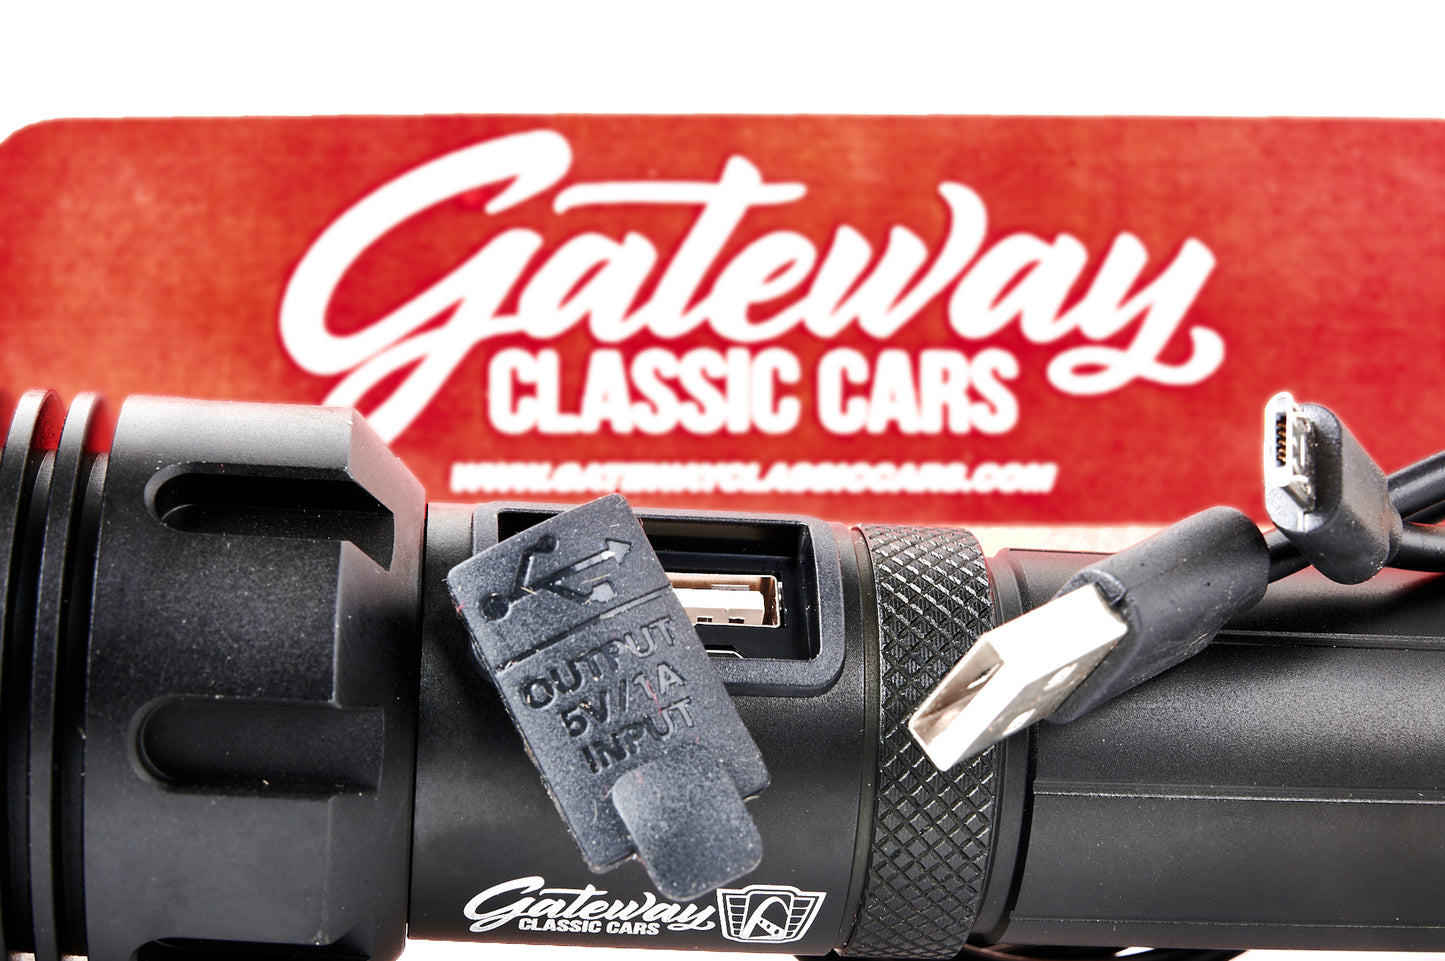 Gateway Classic Cars - Super Bright Black Tactical 10.5in Rechargeable Flashlight